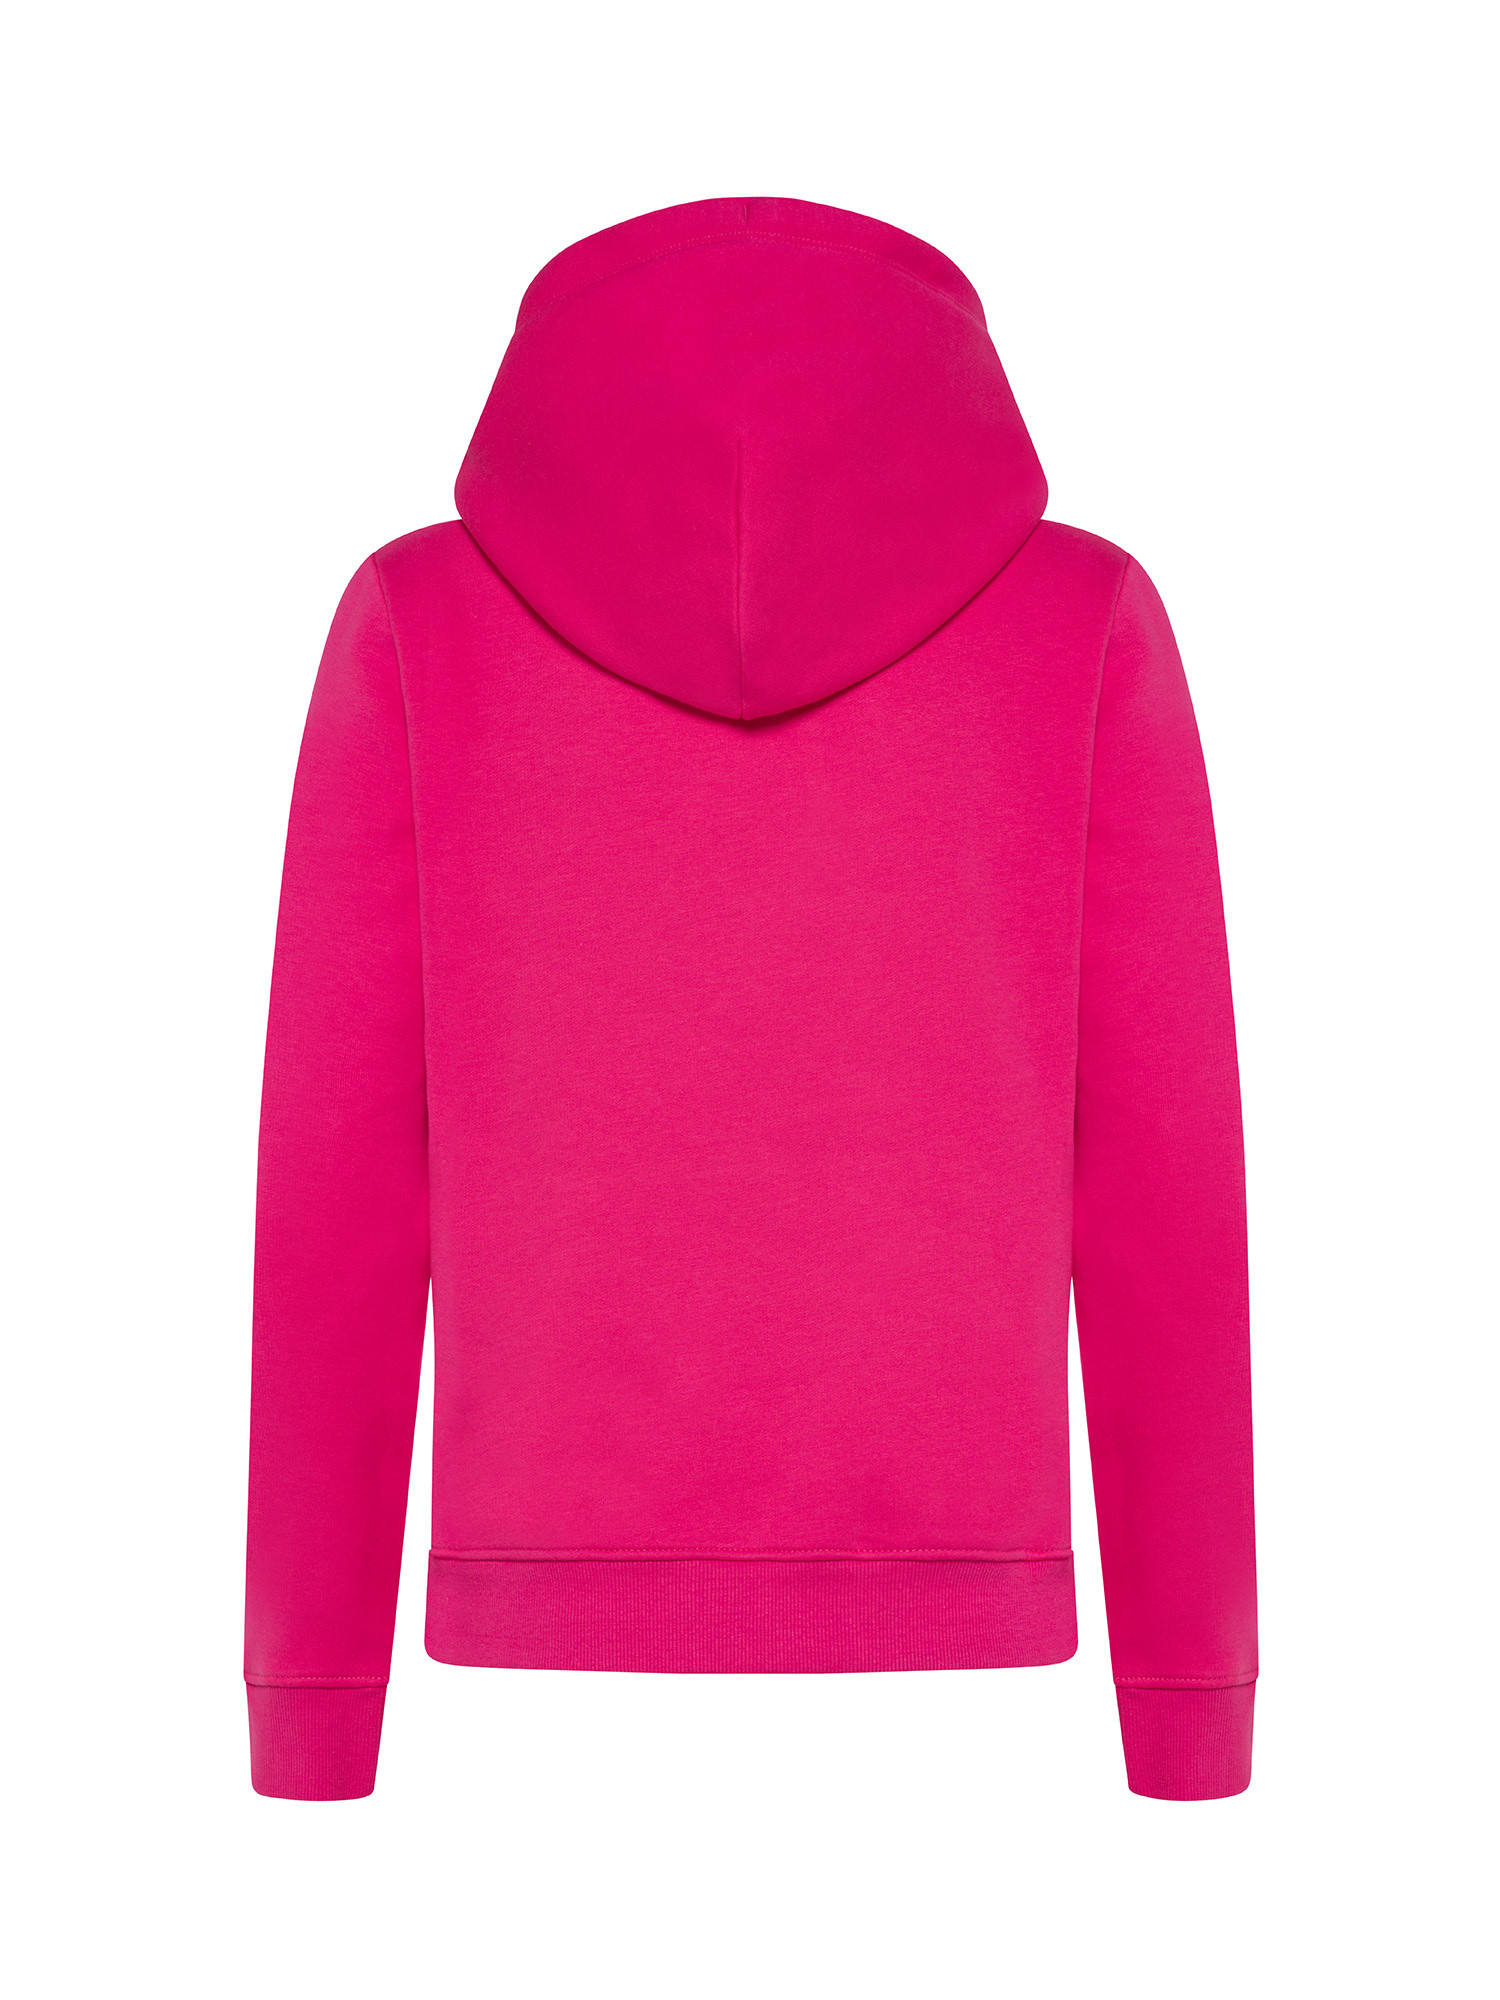 Tommy Jeans - Cotton hooded sweatshirt, Pink Fuchsia, large image number 1